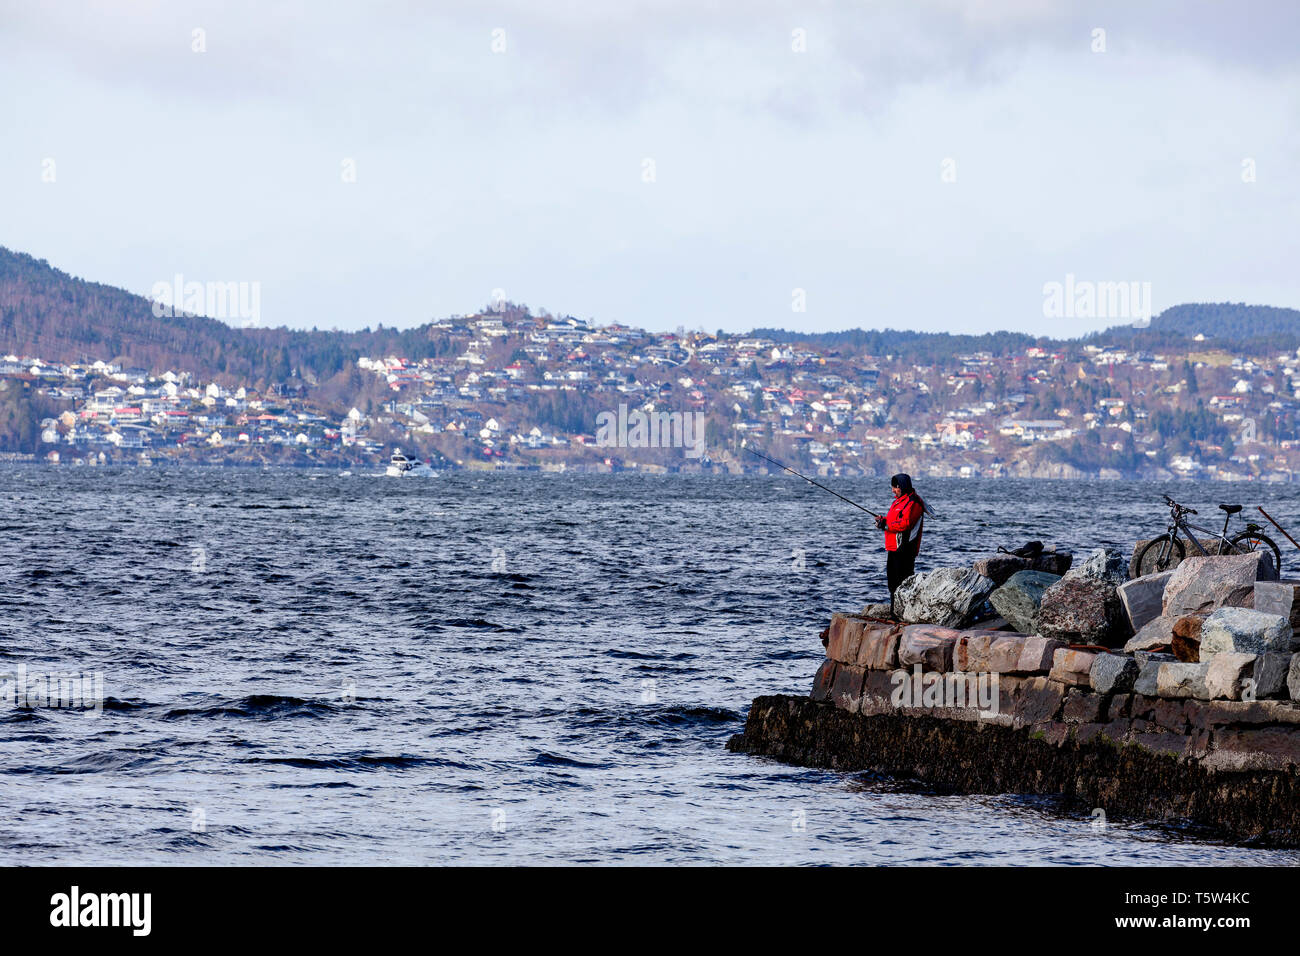 A man fishing from the shore, outside Bergen city, Norway. Askoy island in the background. Stock Photo